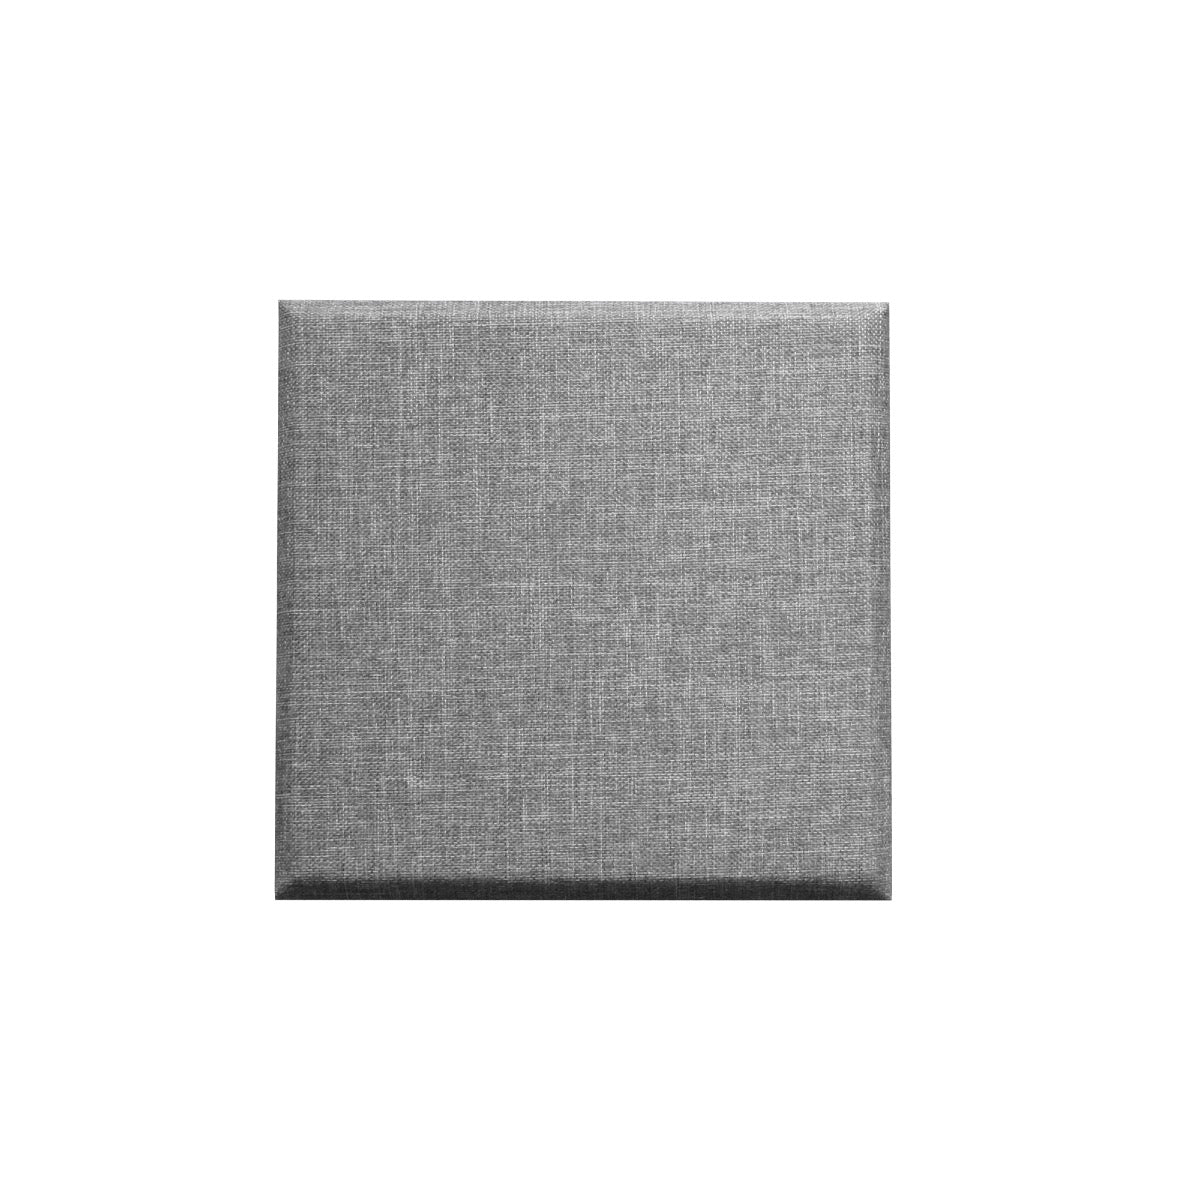 Primacoustic 2" Control Cube Panel - Square Edge - Gray - 12 Pack